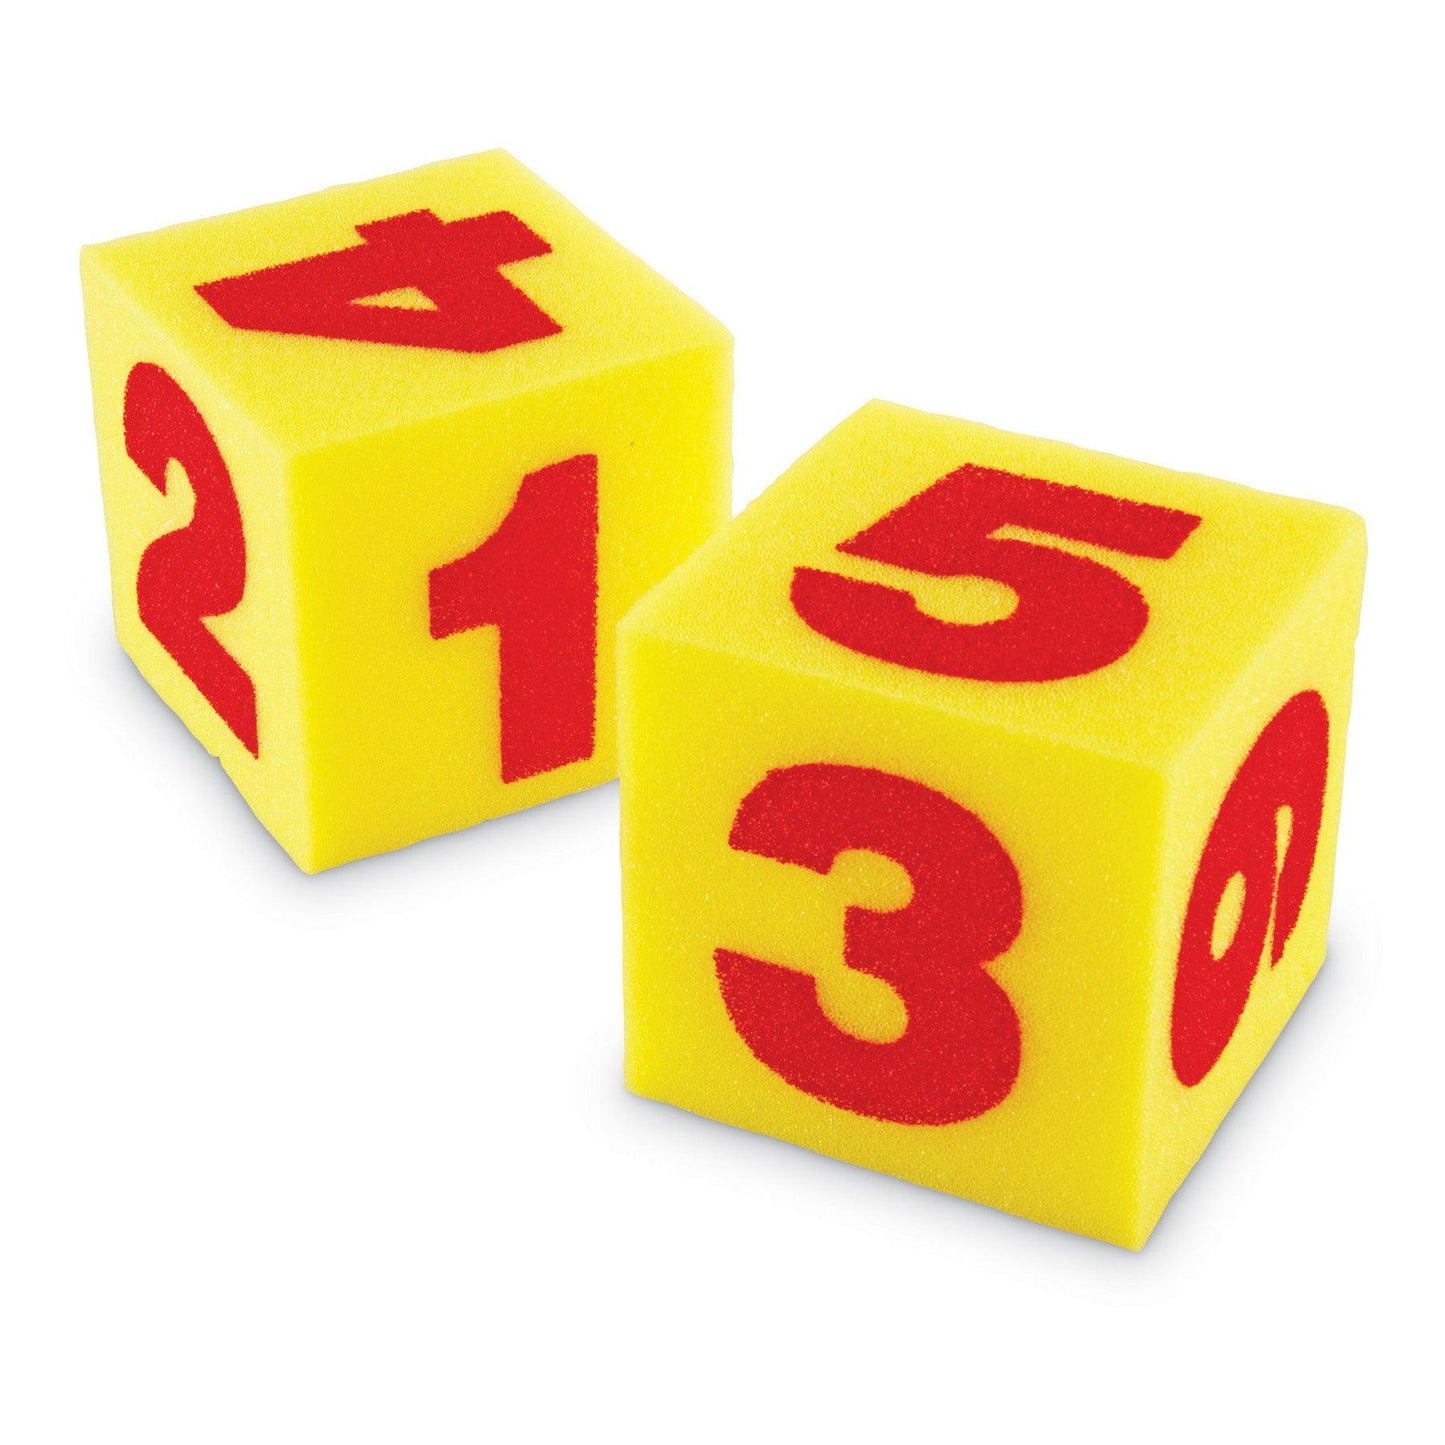 Giant Soft Numeral Cubes, 2 Per Pack, 3 Packs - Loomini